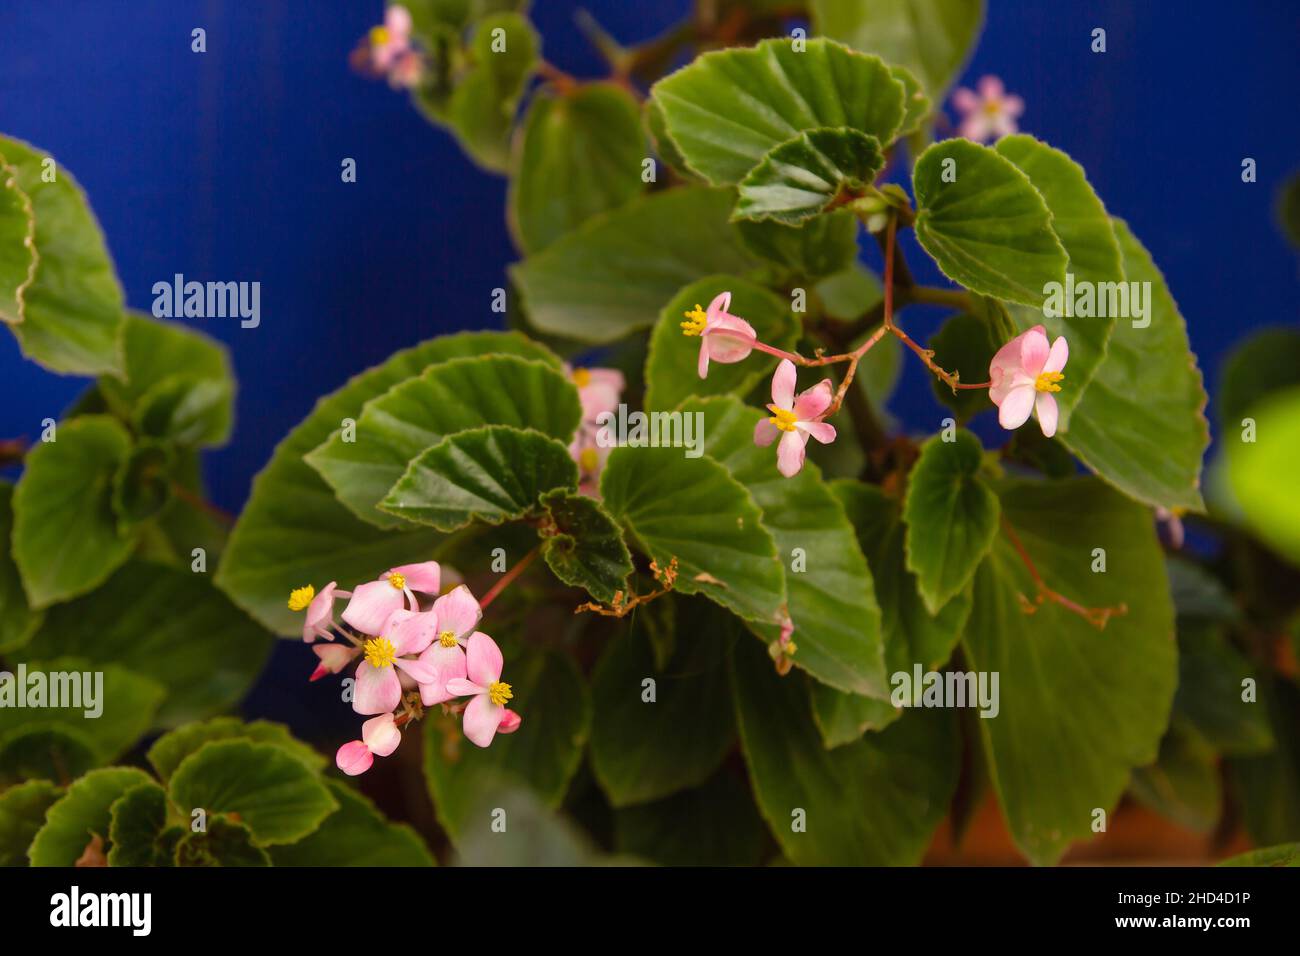 Begonia cucullata plant known as wax begonia pink flowers blooming in the garden Stock Photo